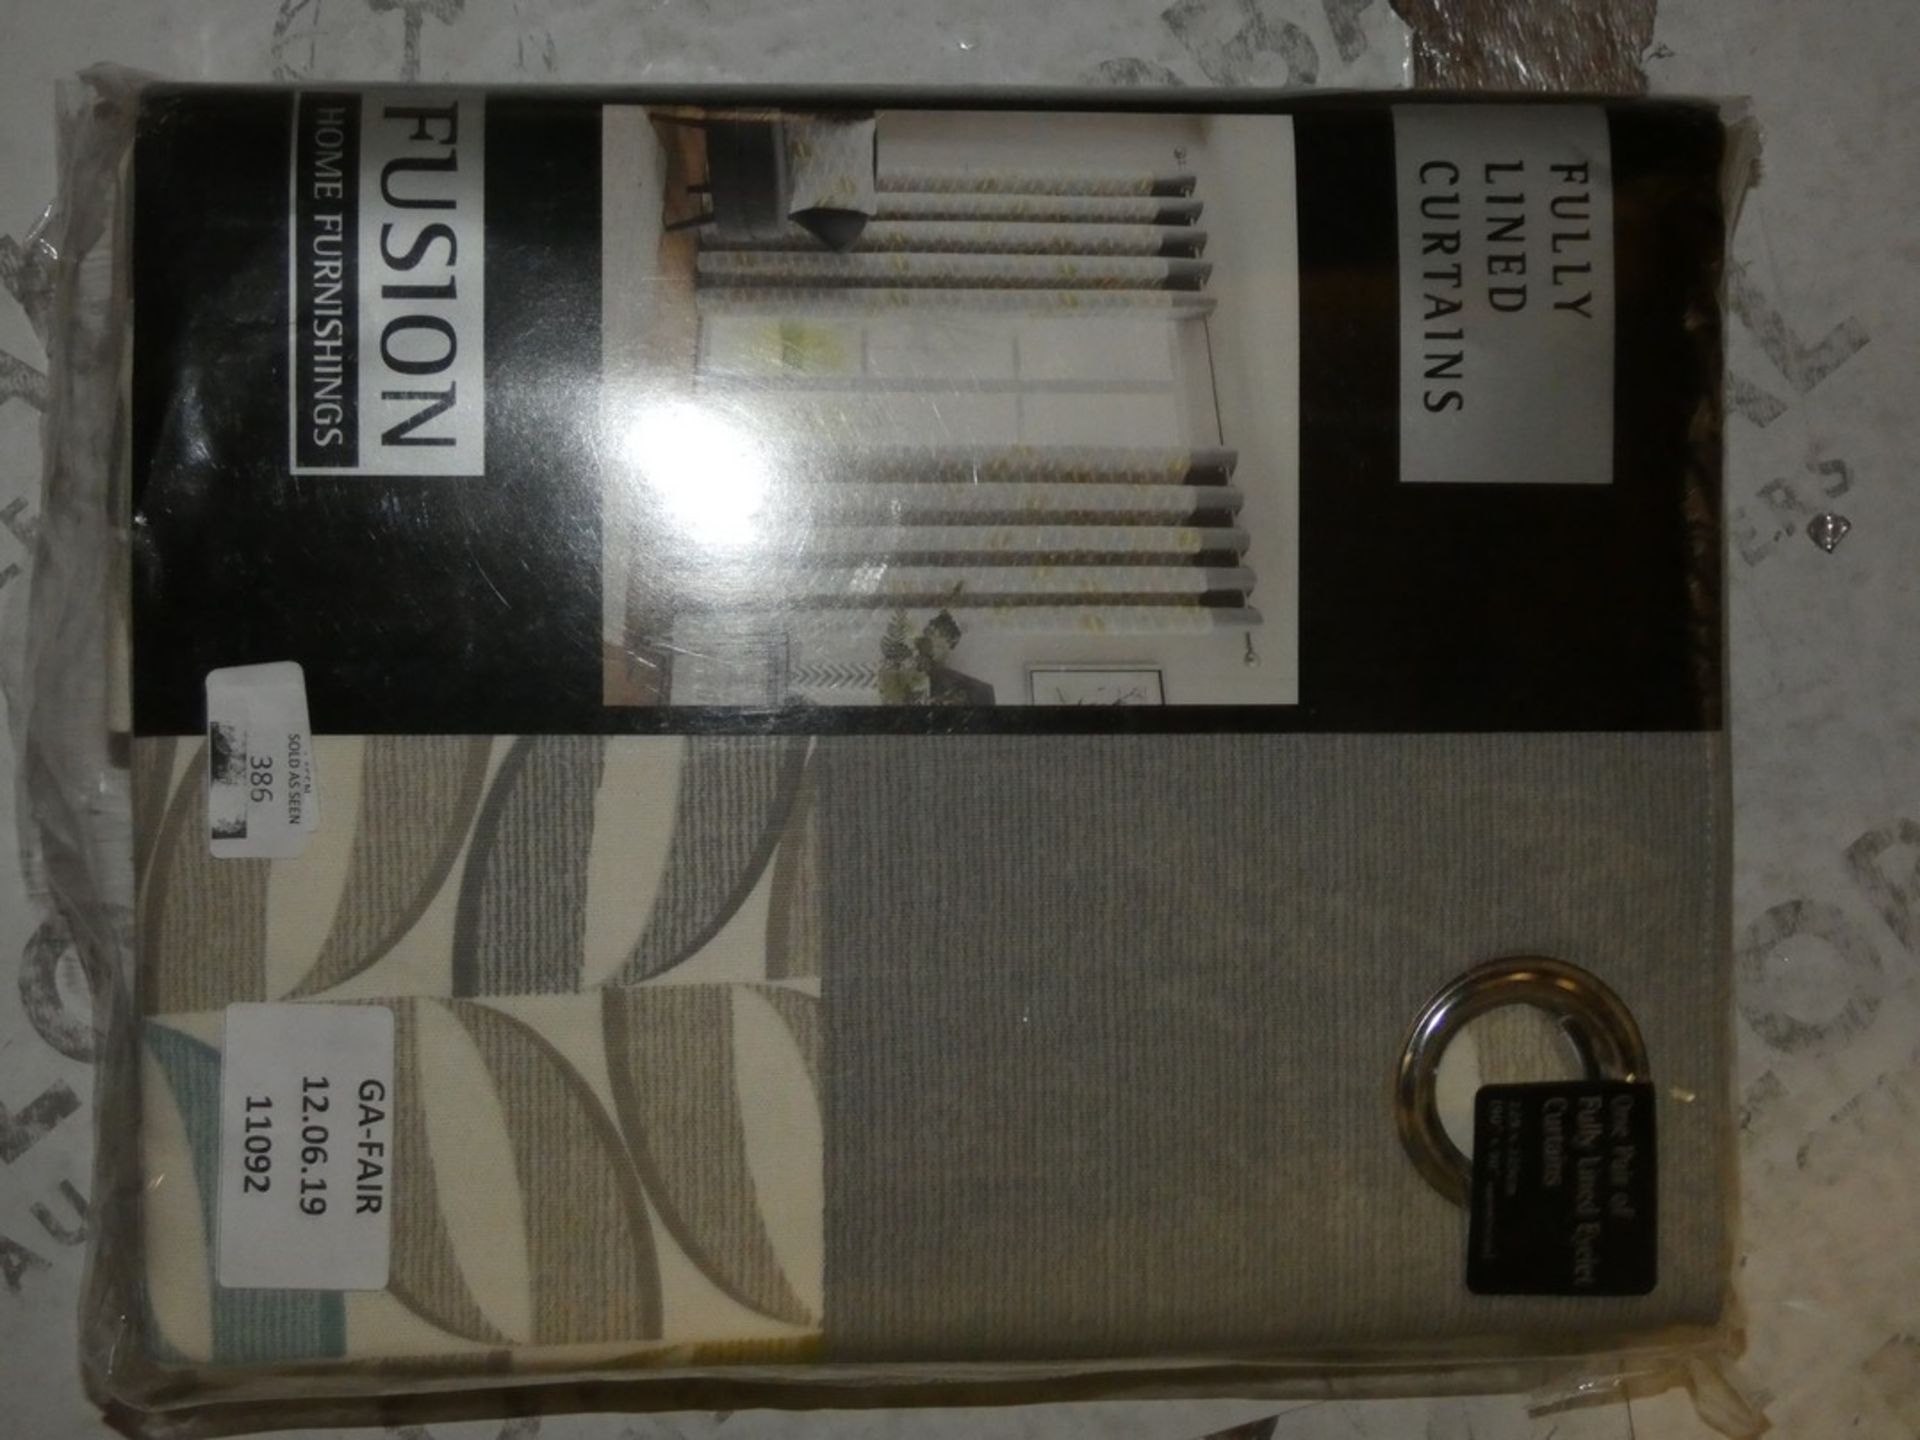 Bagged Brand New Pair of Fusion Fully Lined Eyelet Headed Curtains RRP £60 (11092) (Public Viewing